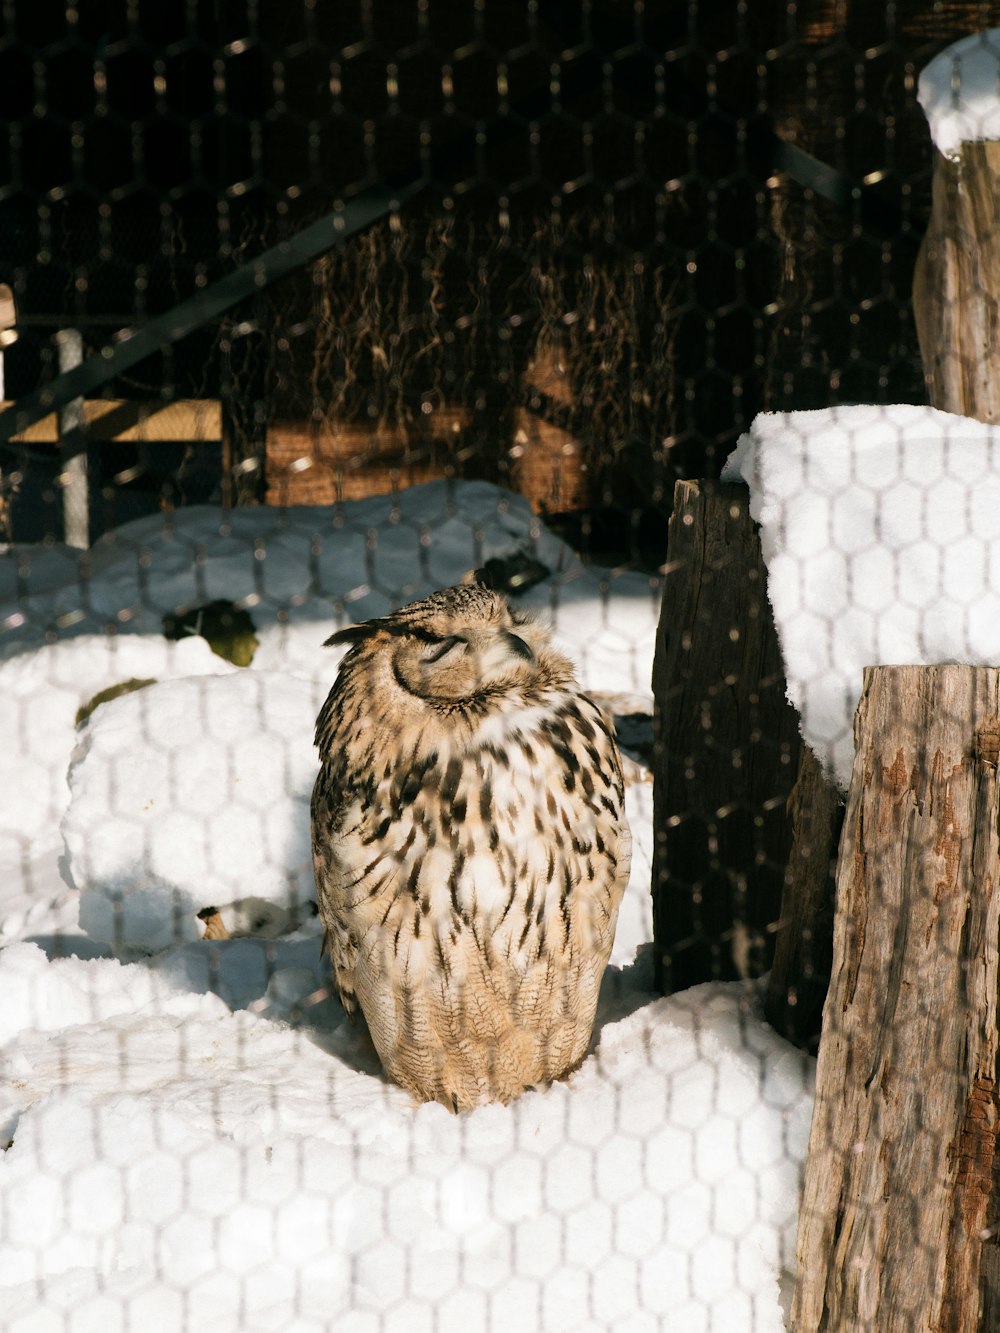 an owl sitting in the snow in a fenced in area